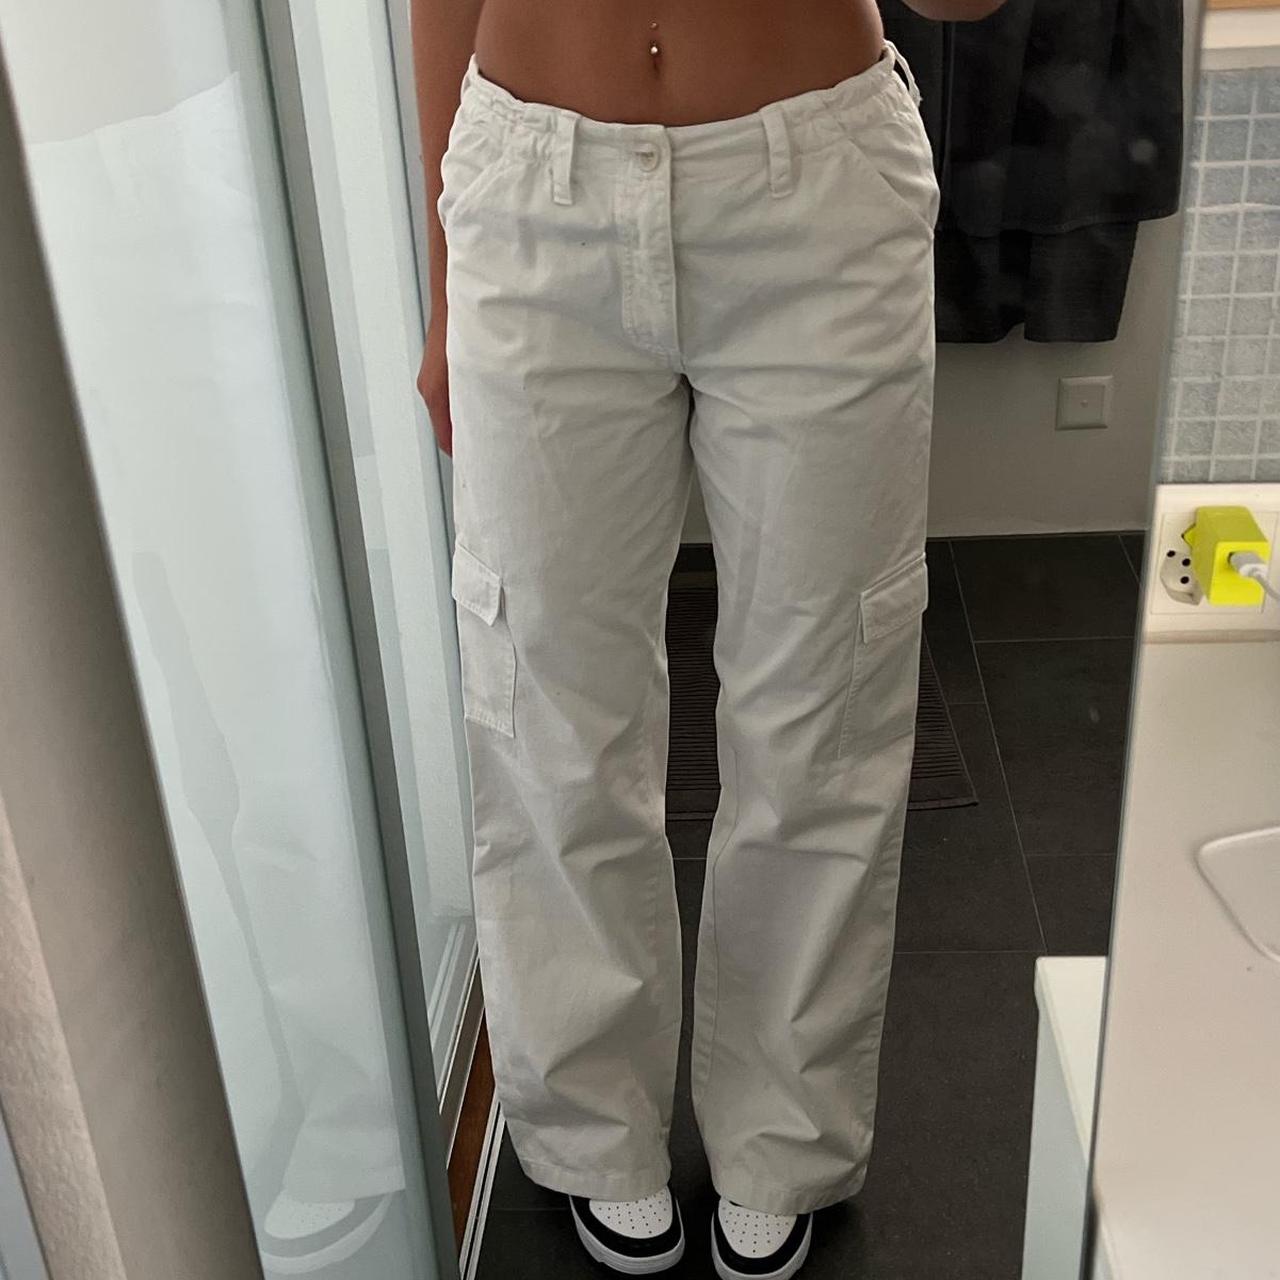 White high waisted cargo pants from Subdued The most - Depop